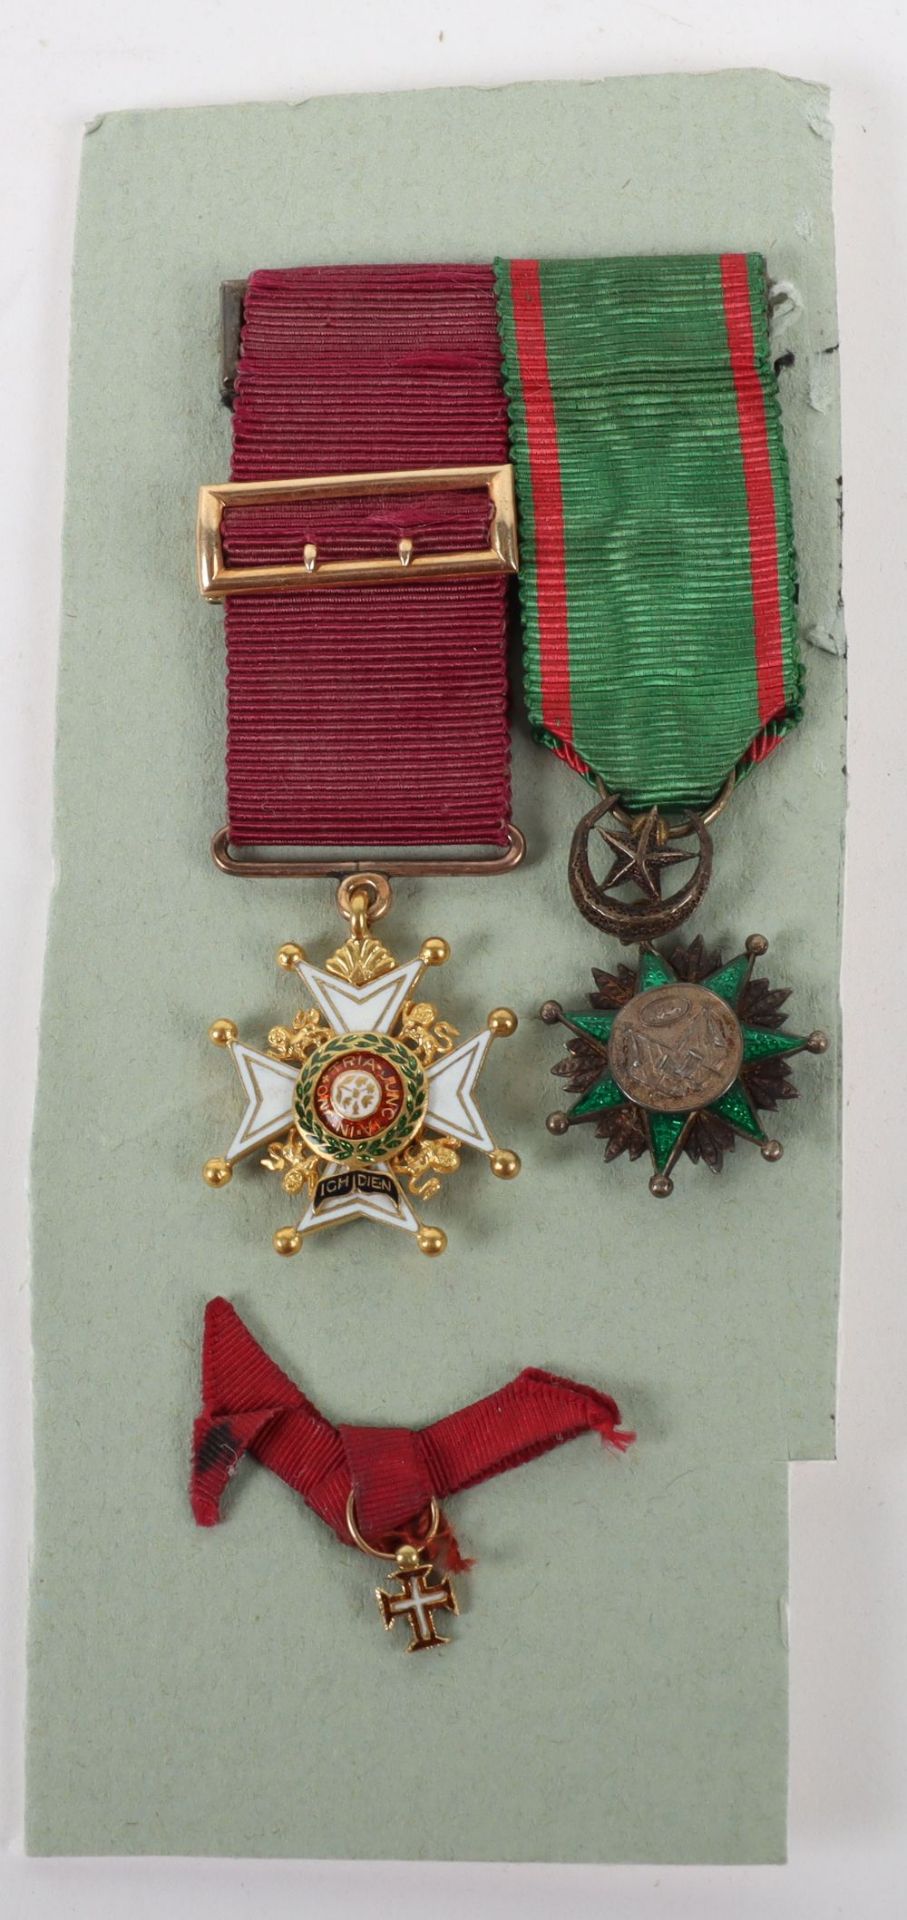 Interesting Pair of Un-Attributed Miniature Medals